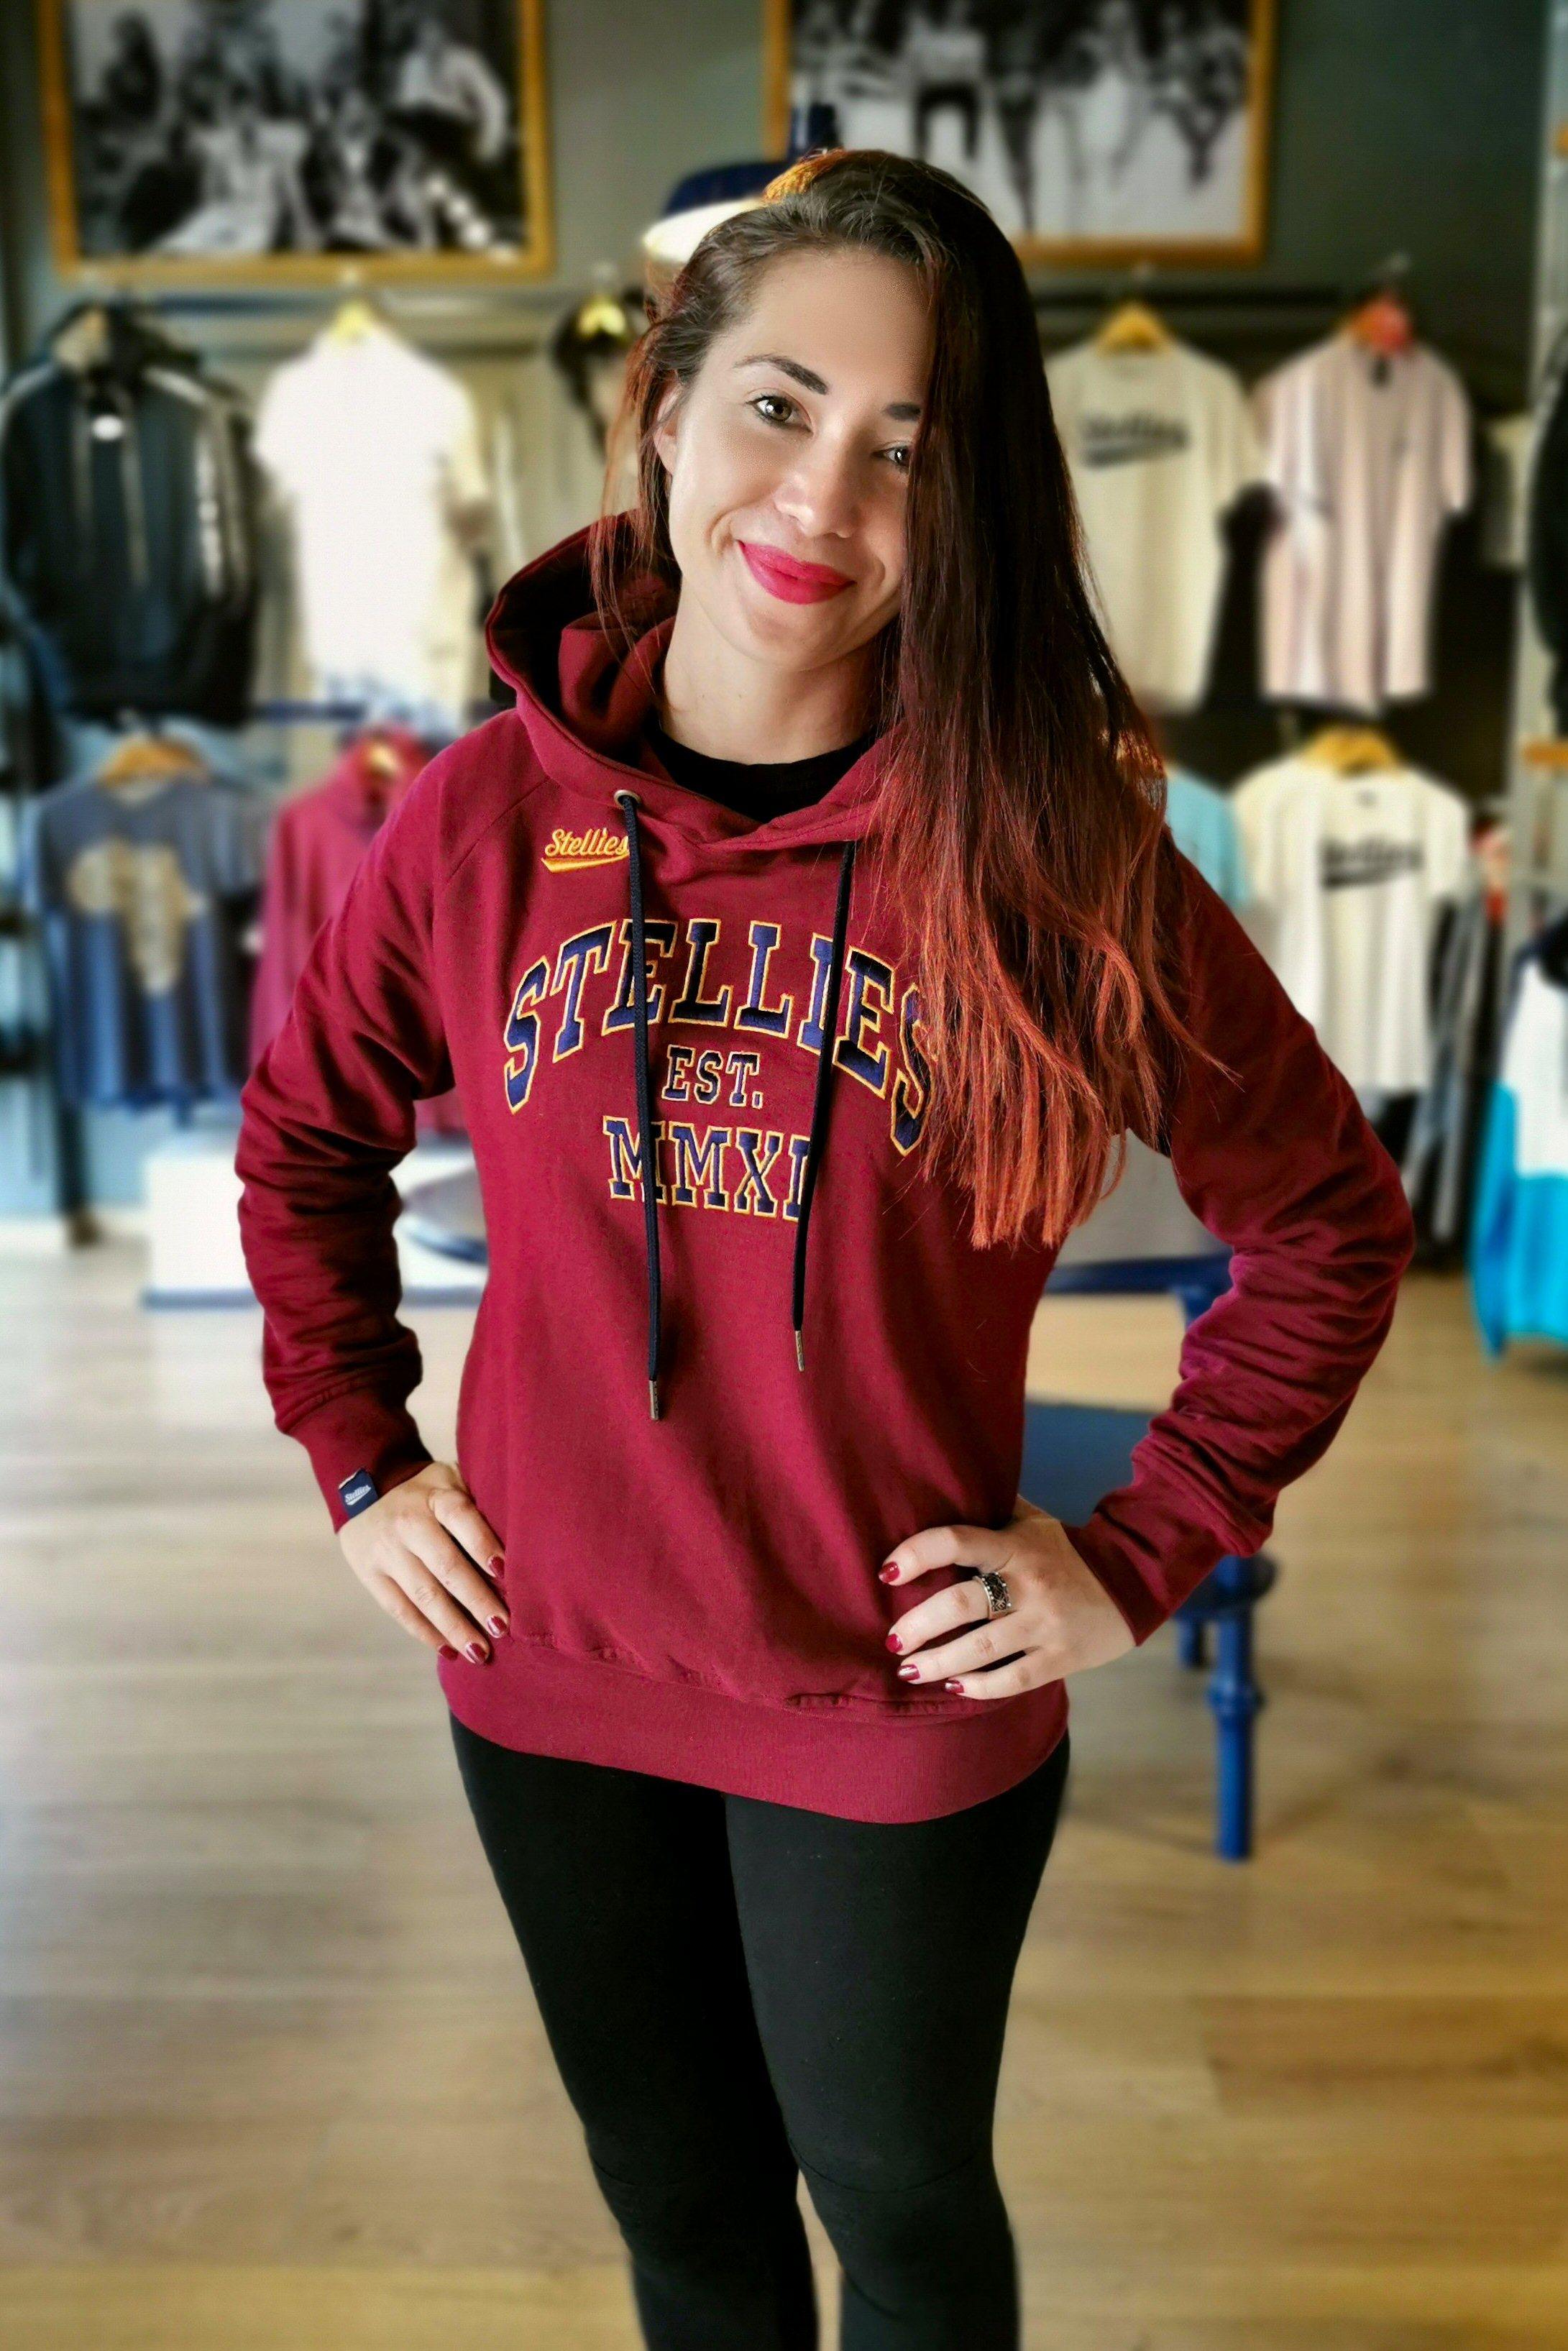 Forgænger Dele erindringsmønter The Champion Hoodie | Womens | Stellies Authentic Clothing